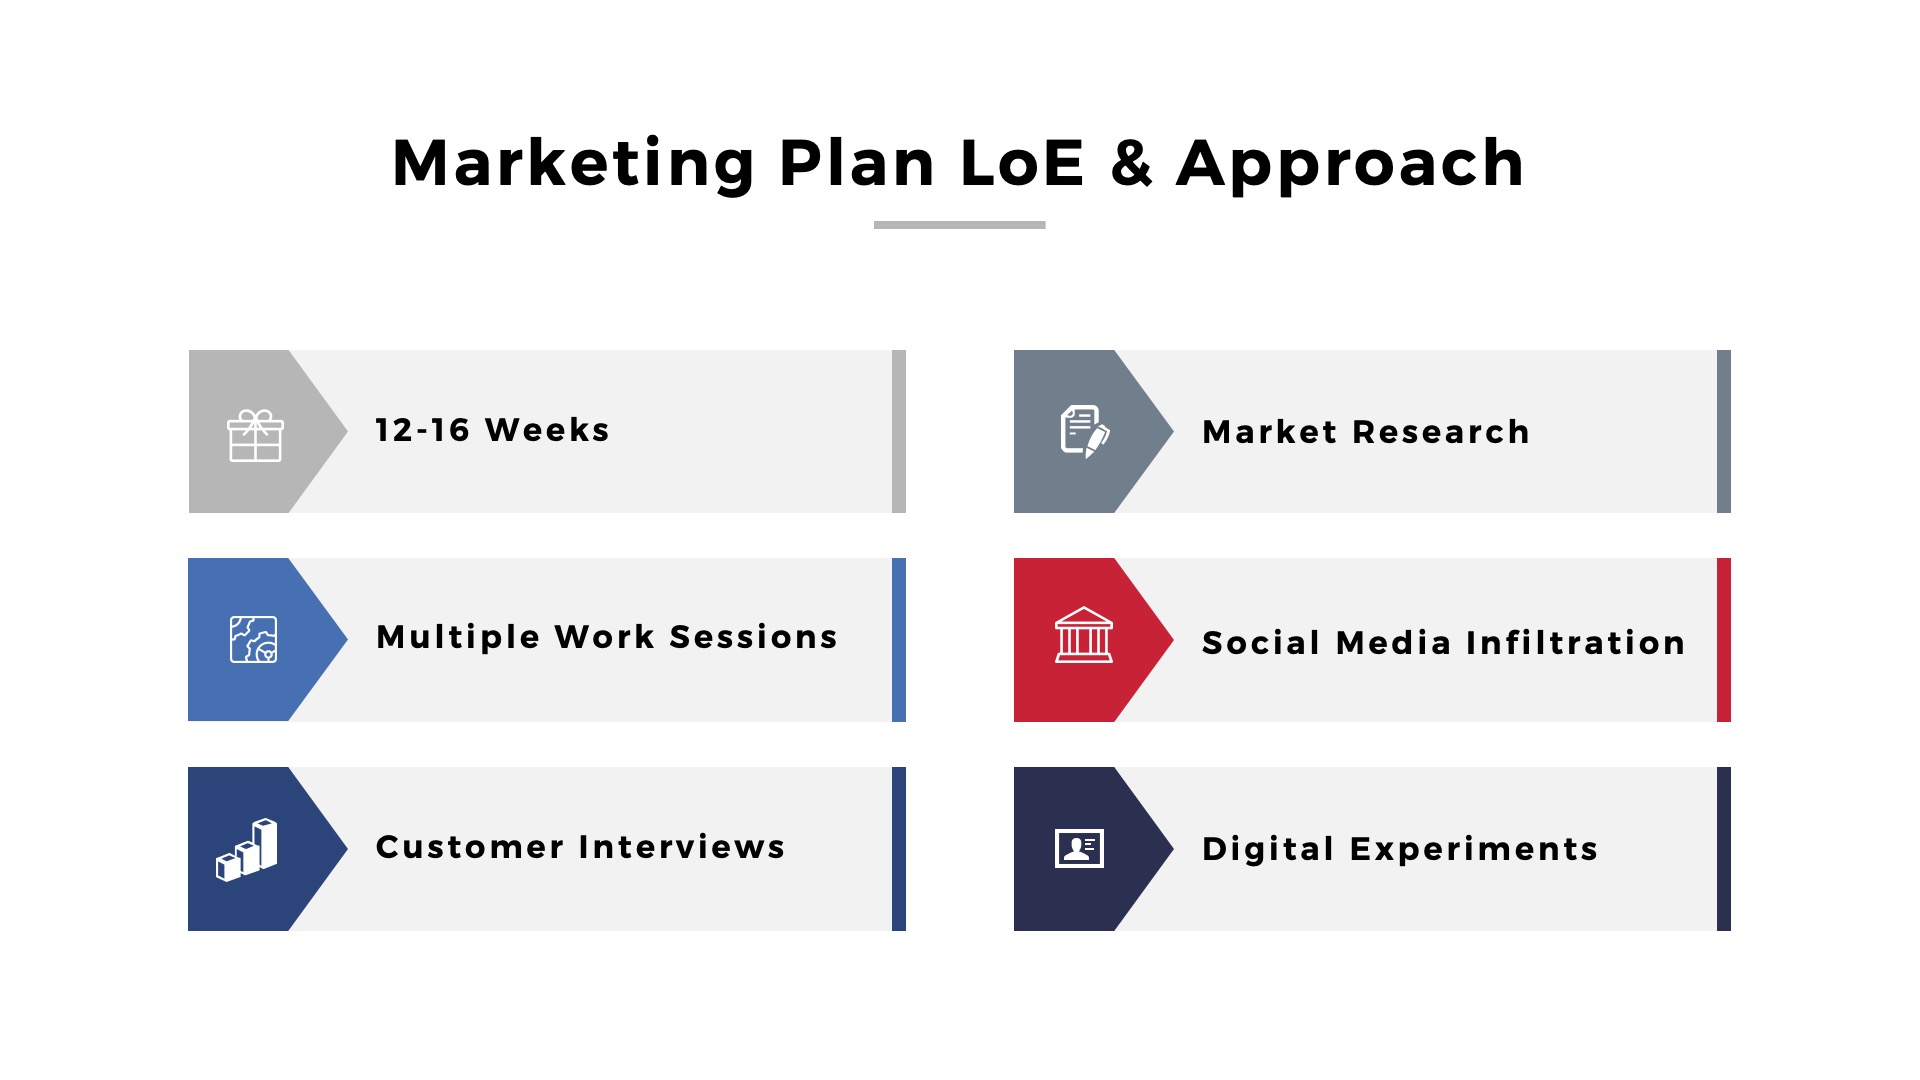 marketing plan loe and approach timeline budget market research social media infiltration digital experiments